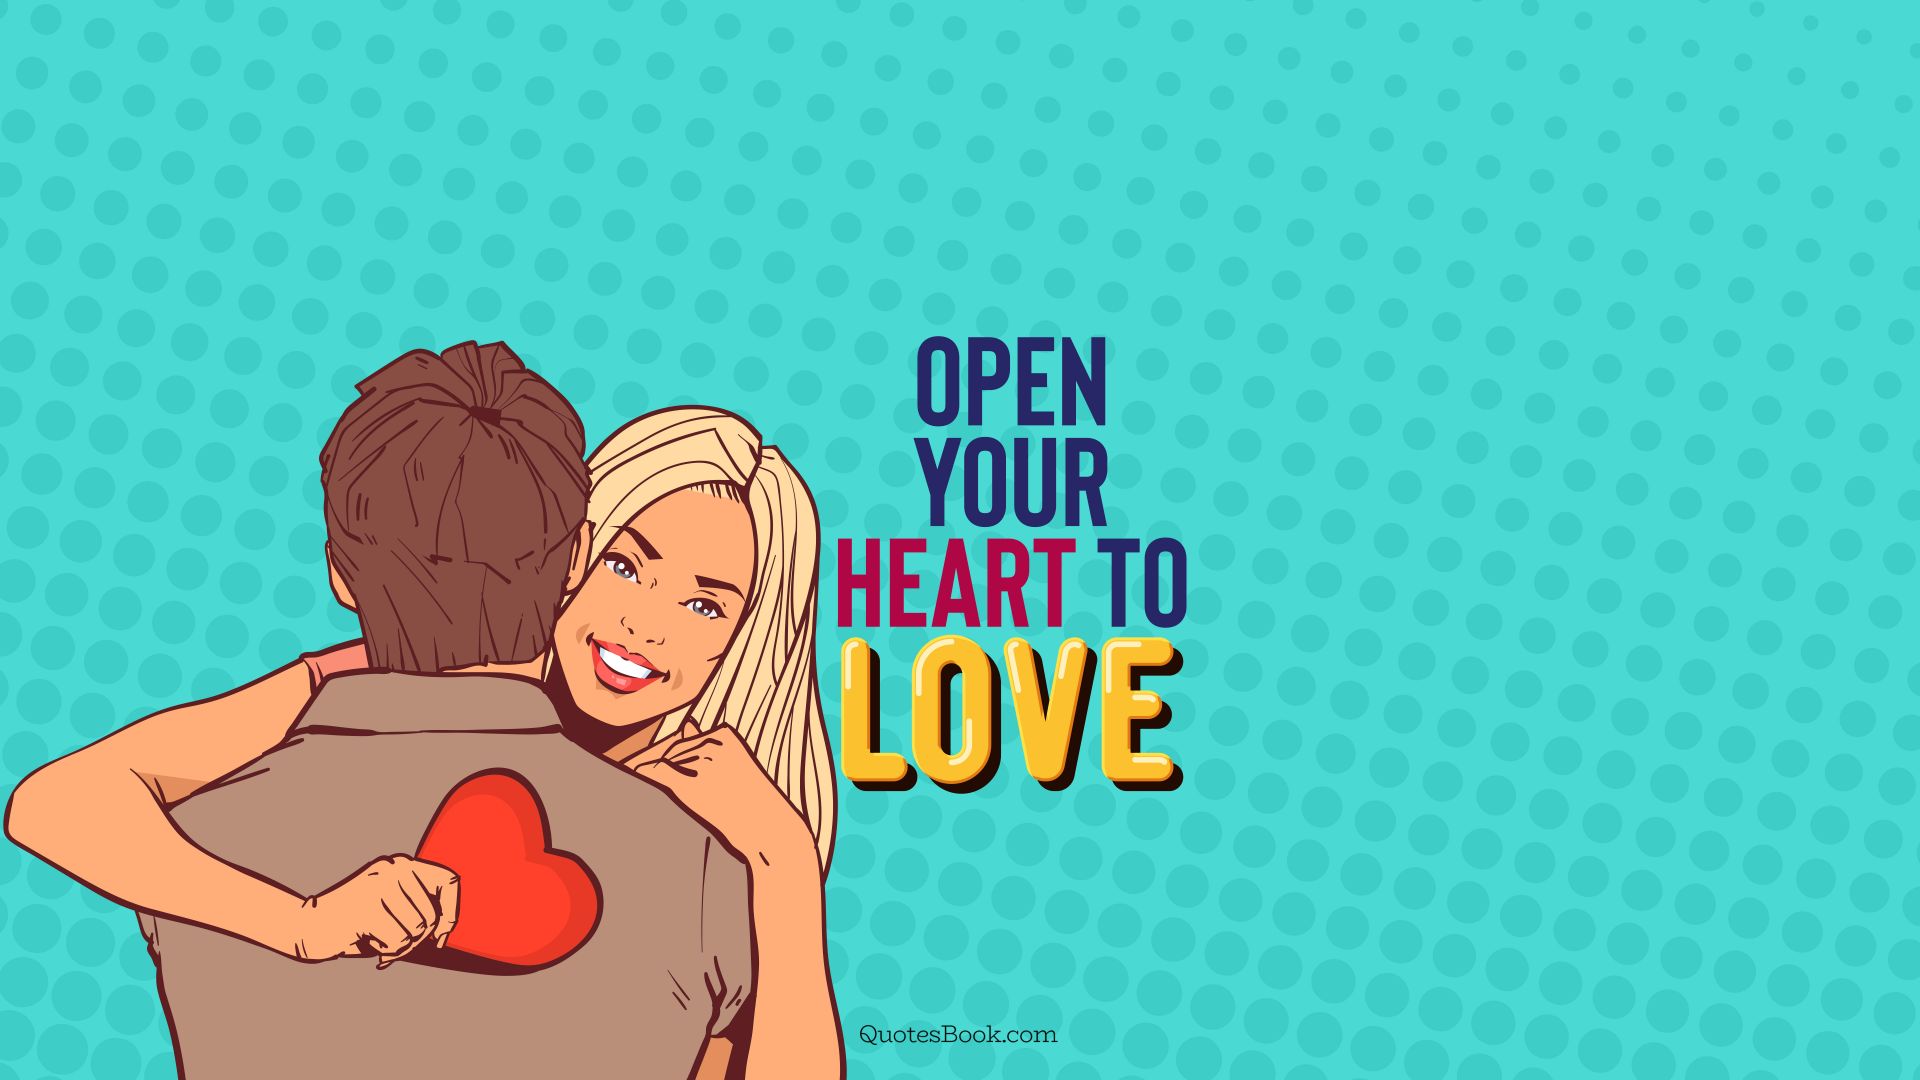 Open your heart to love. - Quote by QuotesBook